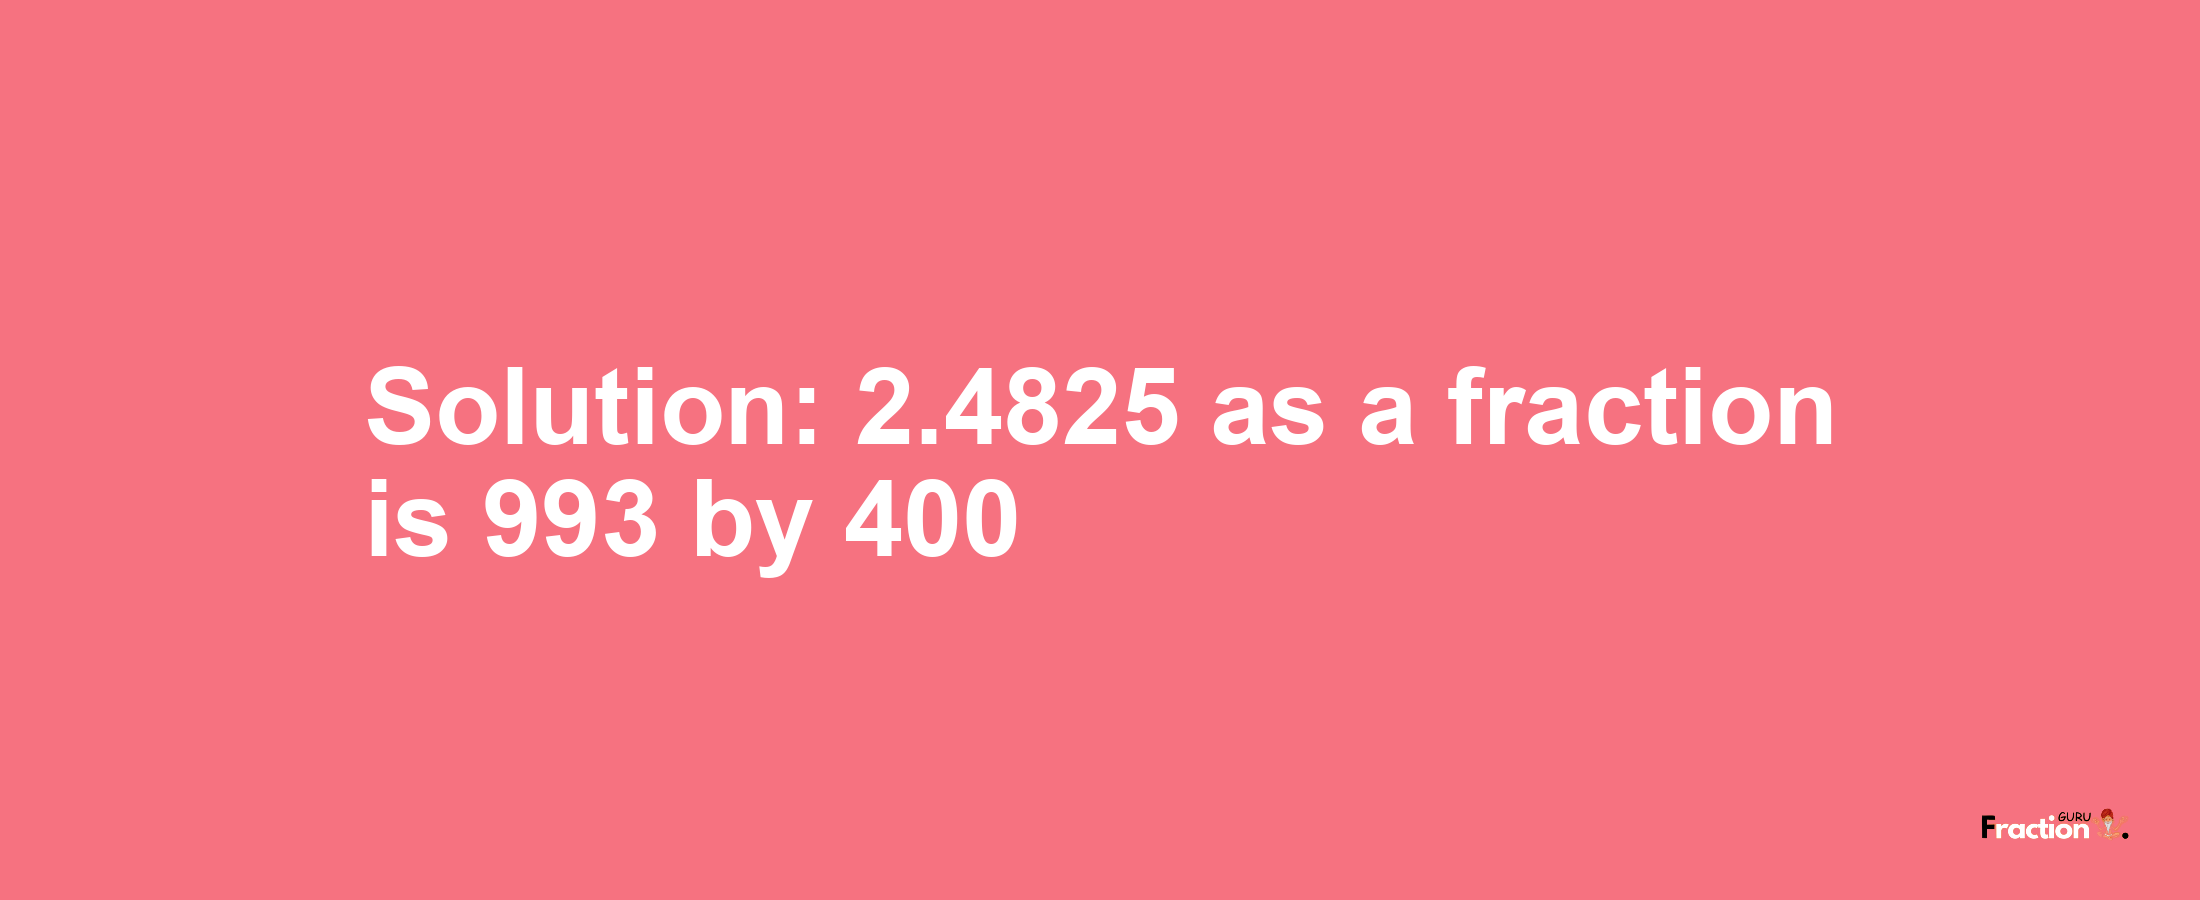 Solution:2.4825 as a fraction is 993/400